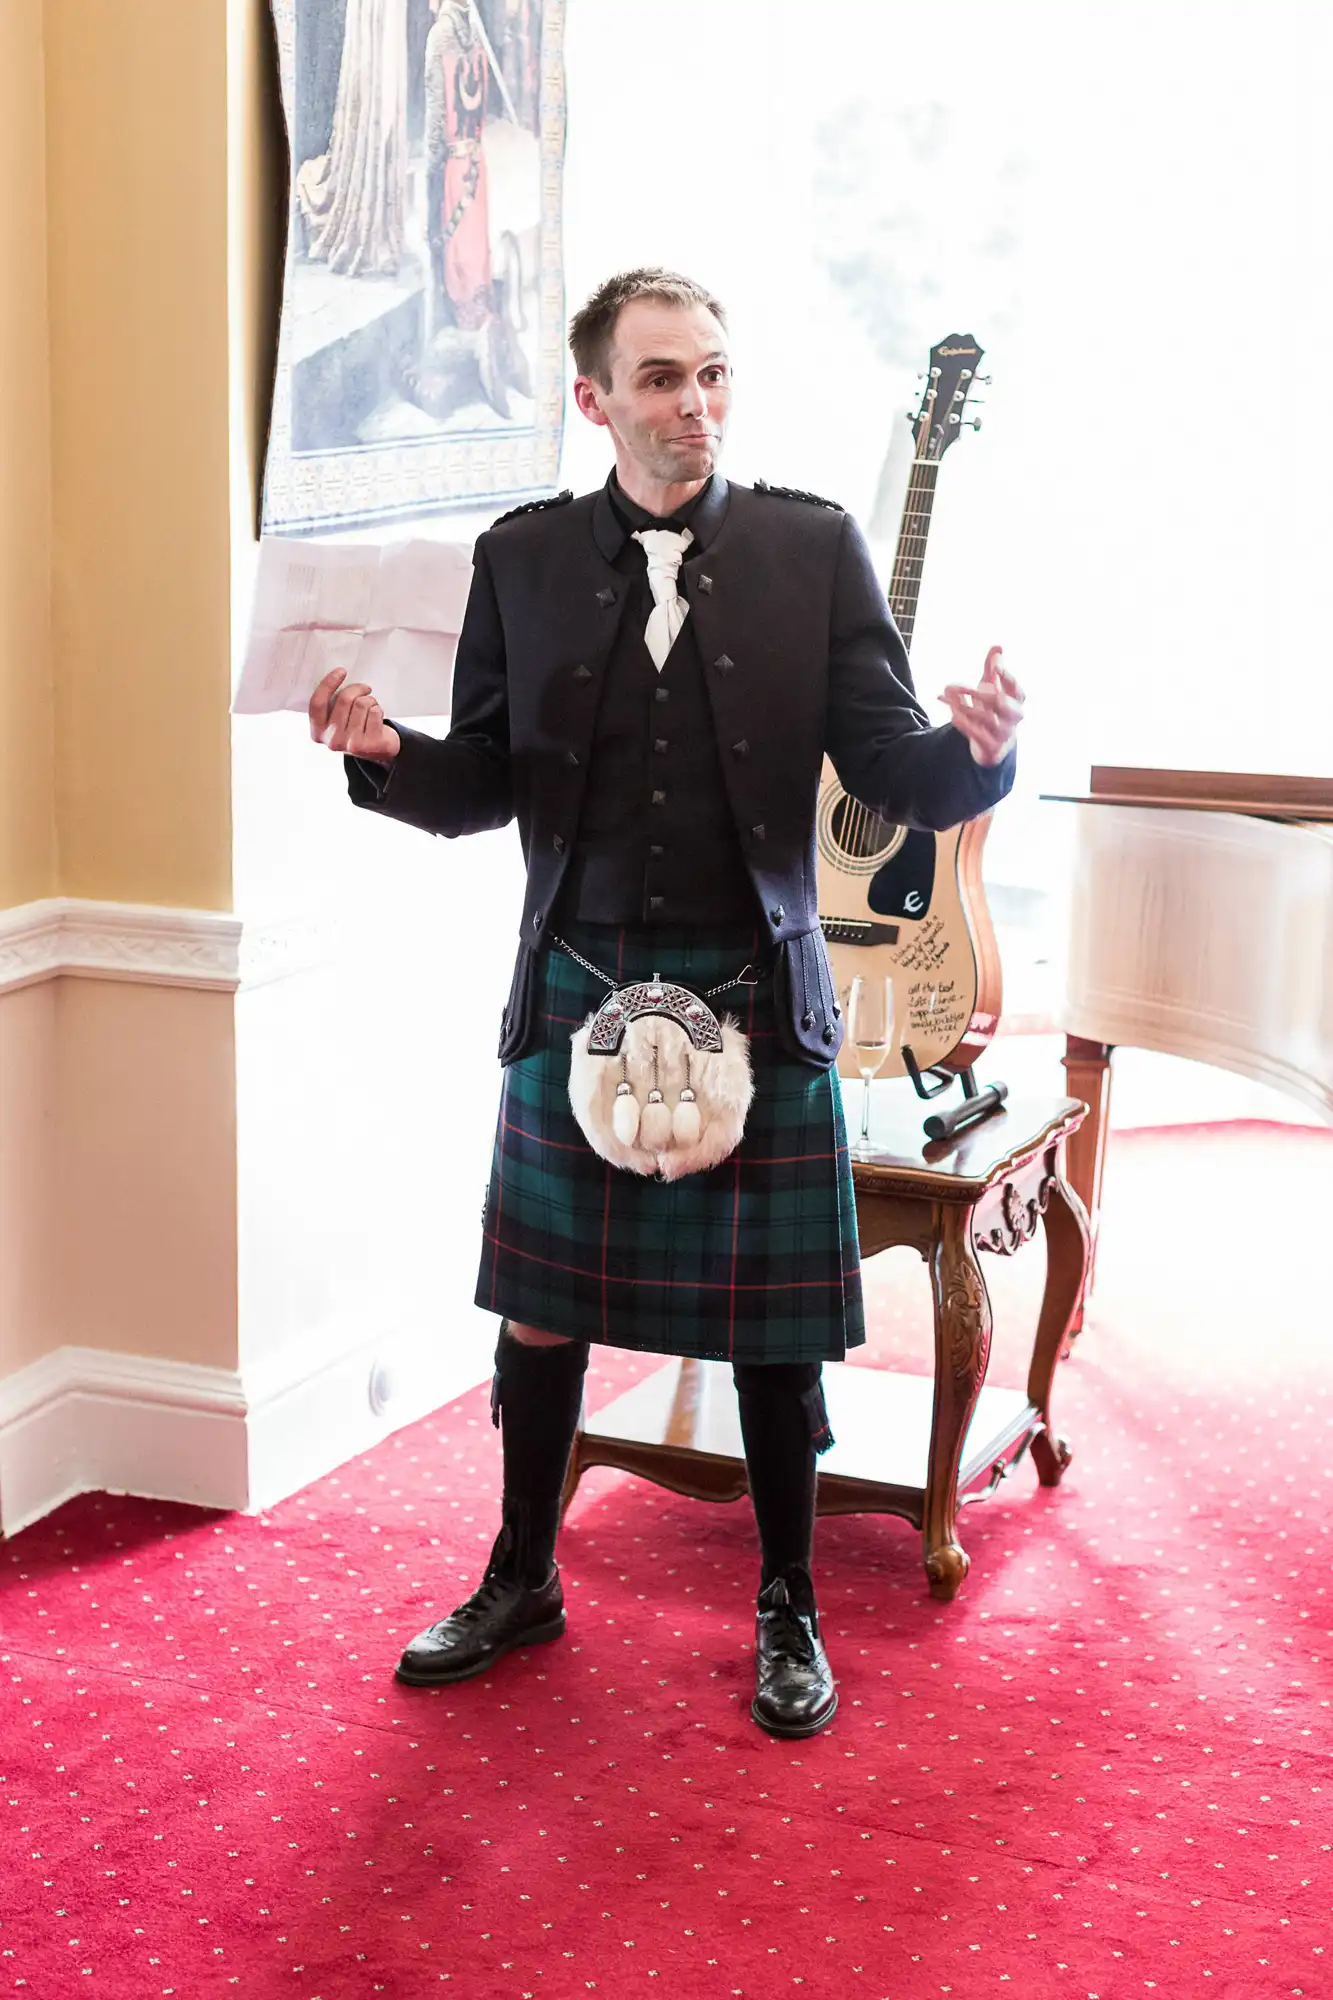 Man in traditional scottish attire, including kilt and sporran, standing in an elegant room with a guitar on a stand behind him.